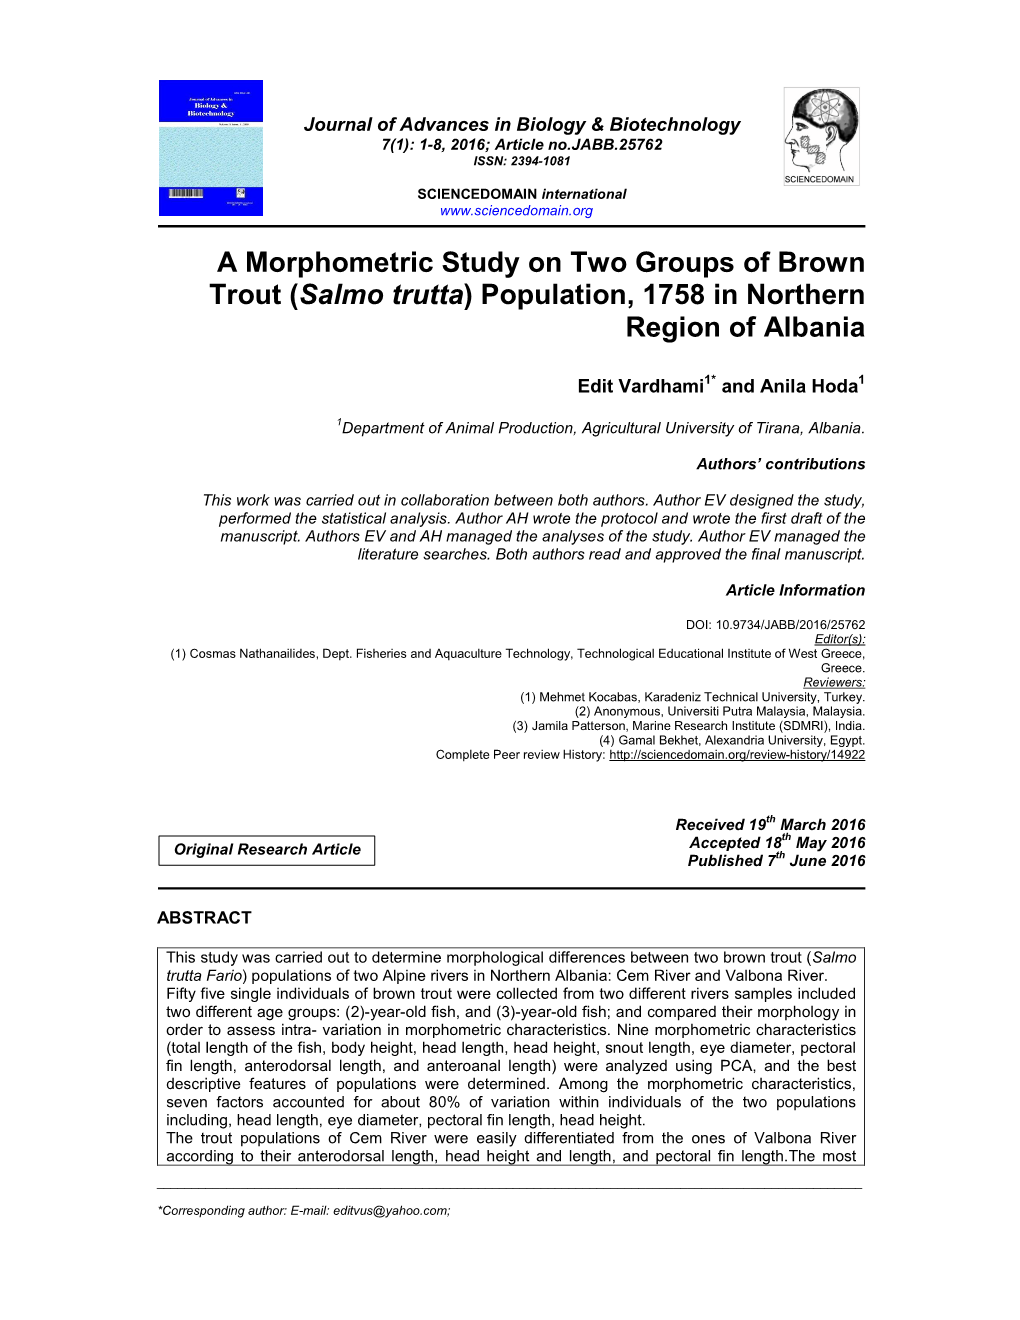 A Morphometric Study on Two Groups of Brown Trout (Salmo Trutta) Population, 1758 in Northern Region of Albania